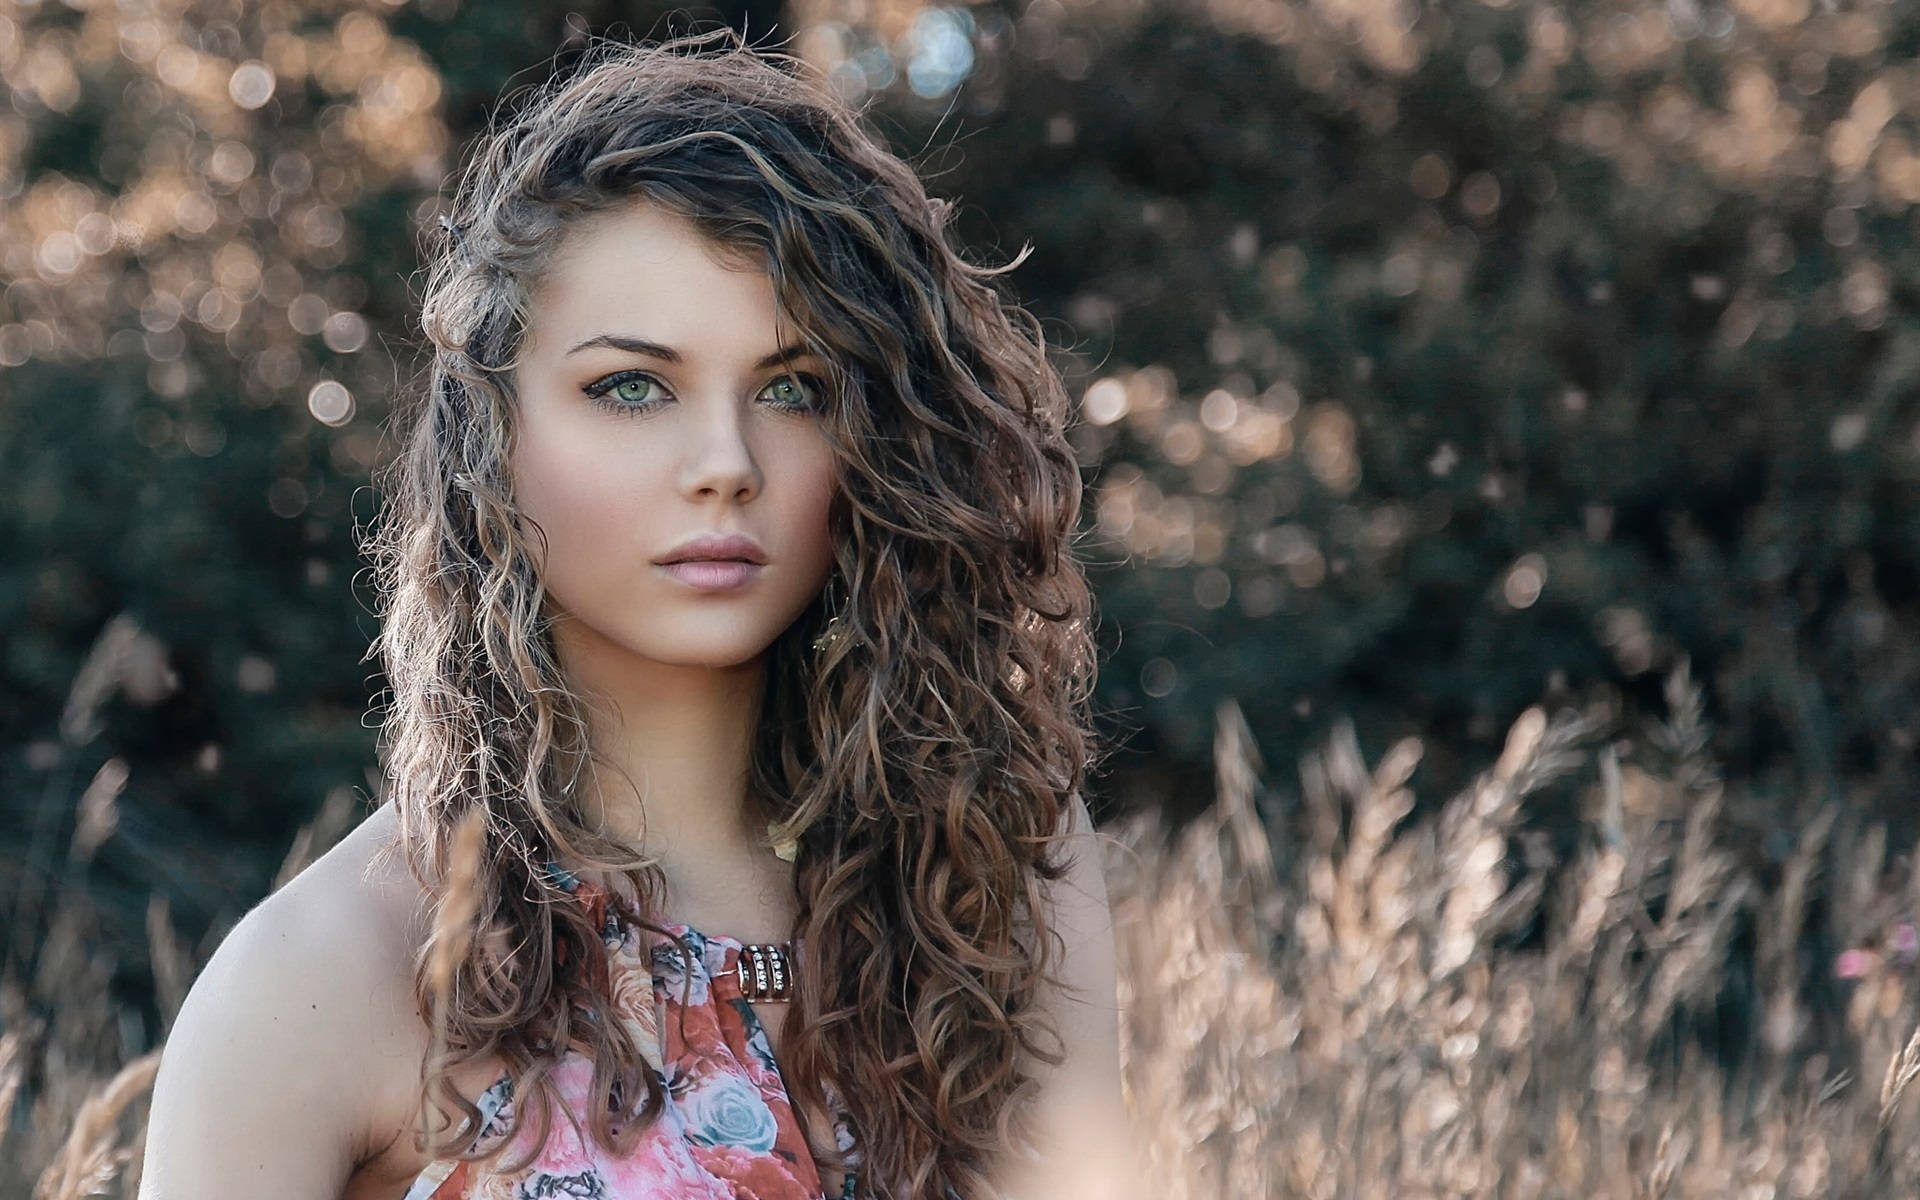 Captivating Woman With Curly Hair Background